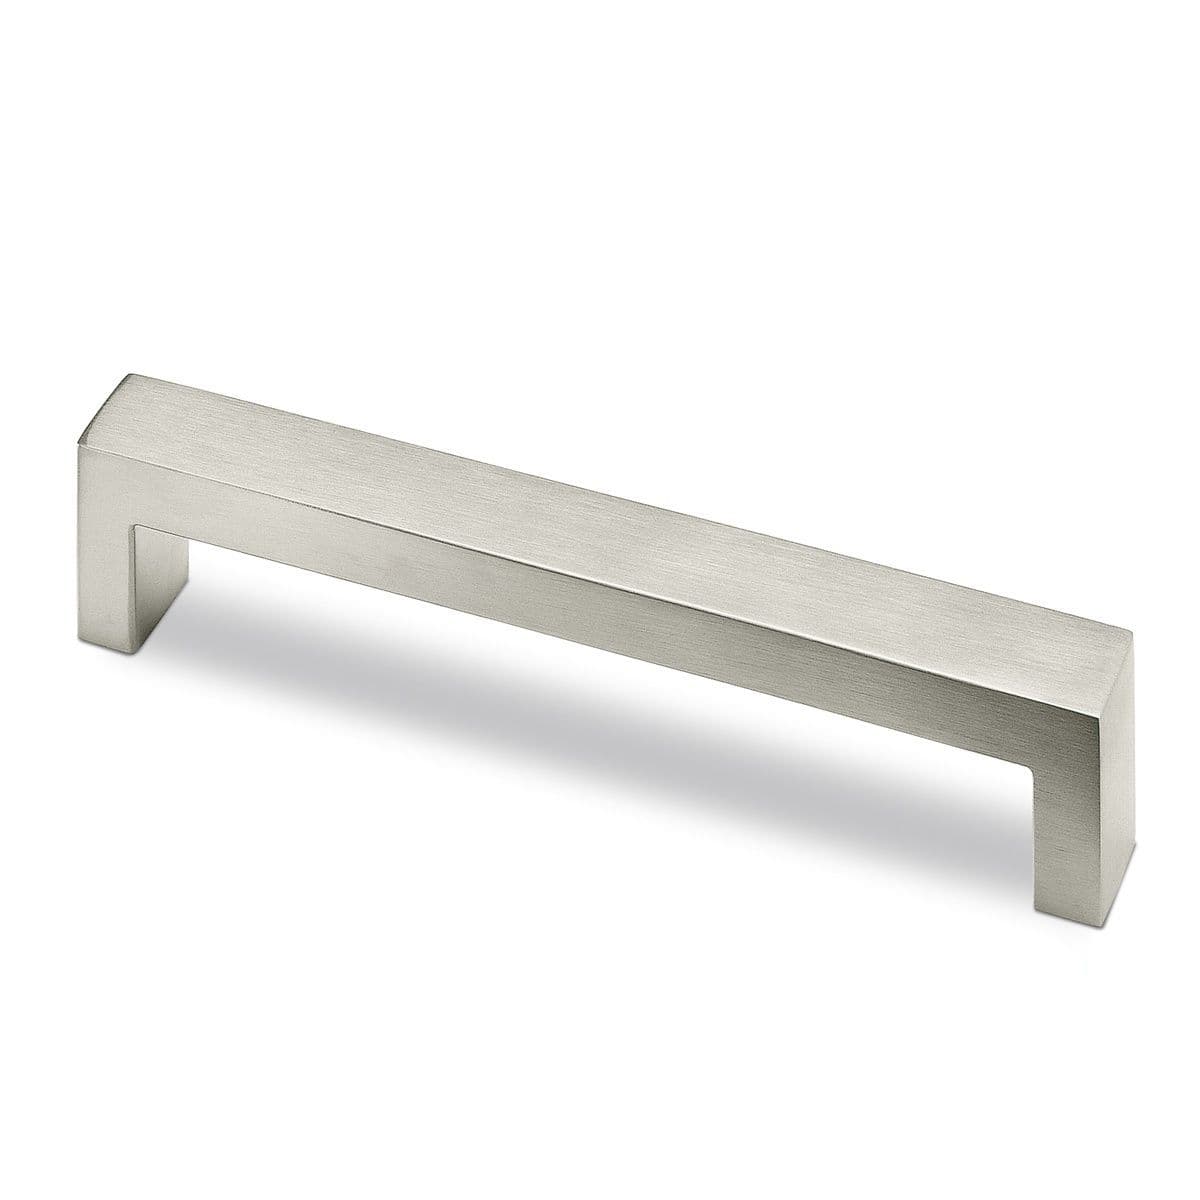 PONTE D Cupboard Handle - 2 sizes - BRUSHED STAINLESS STEEL (HETTICH - Deluxe)